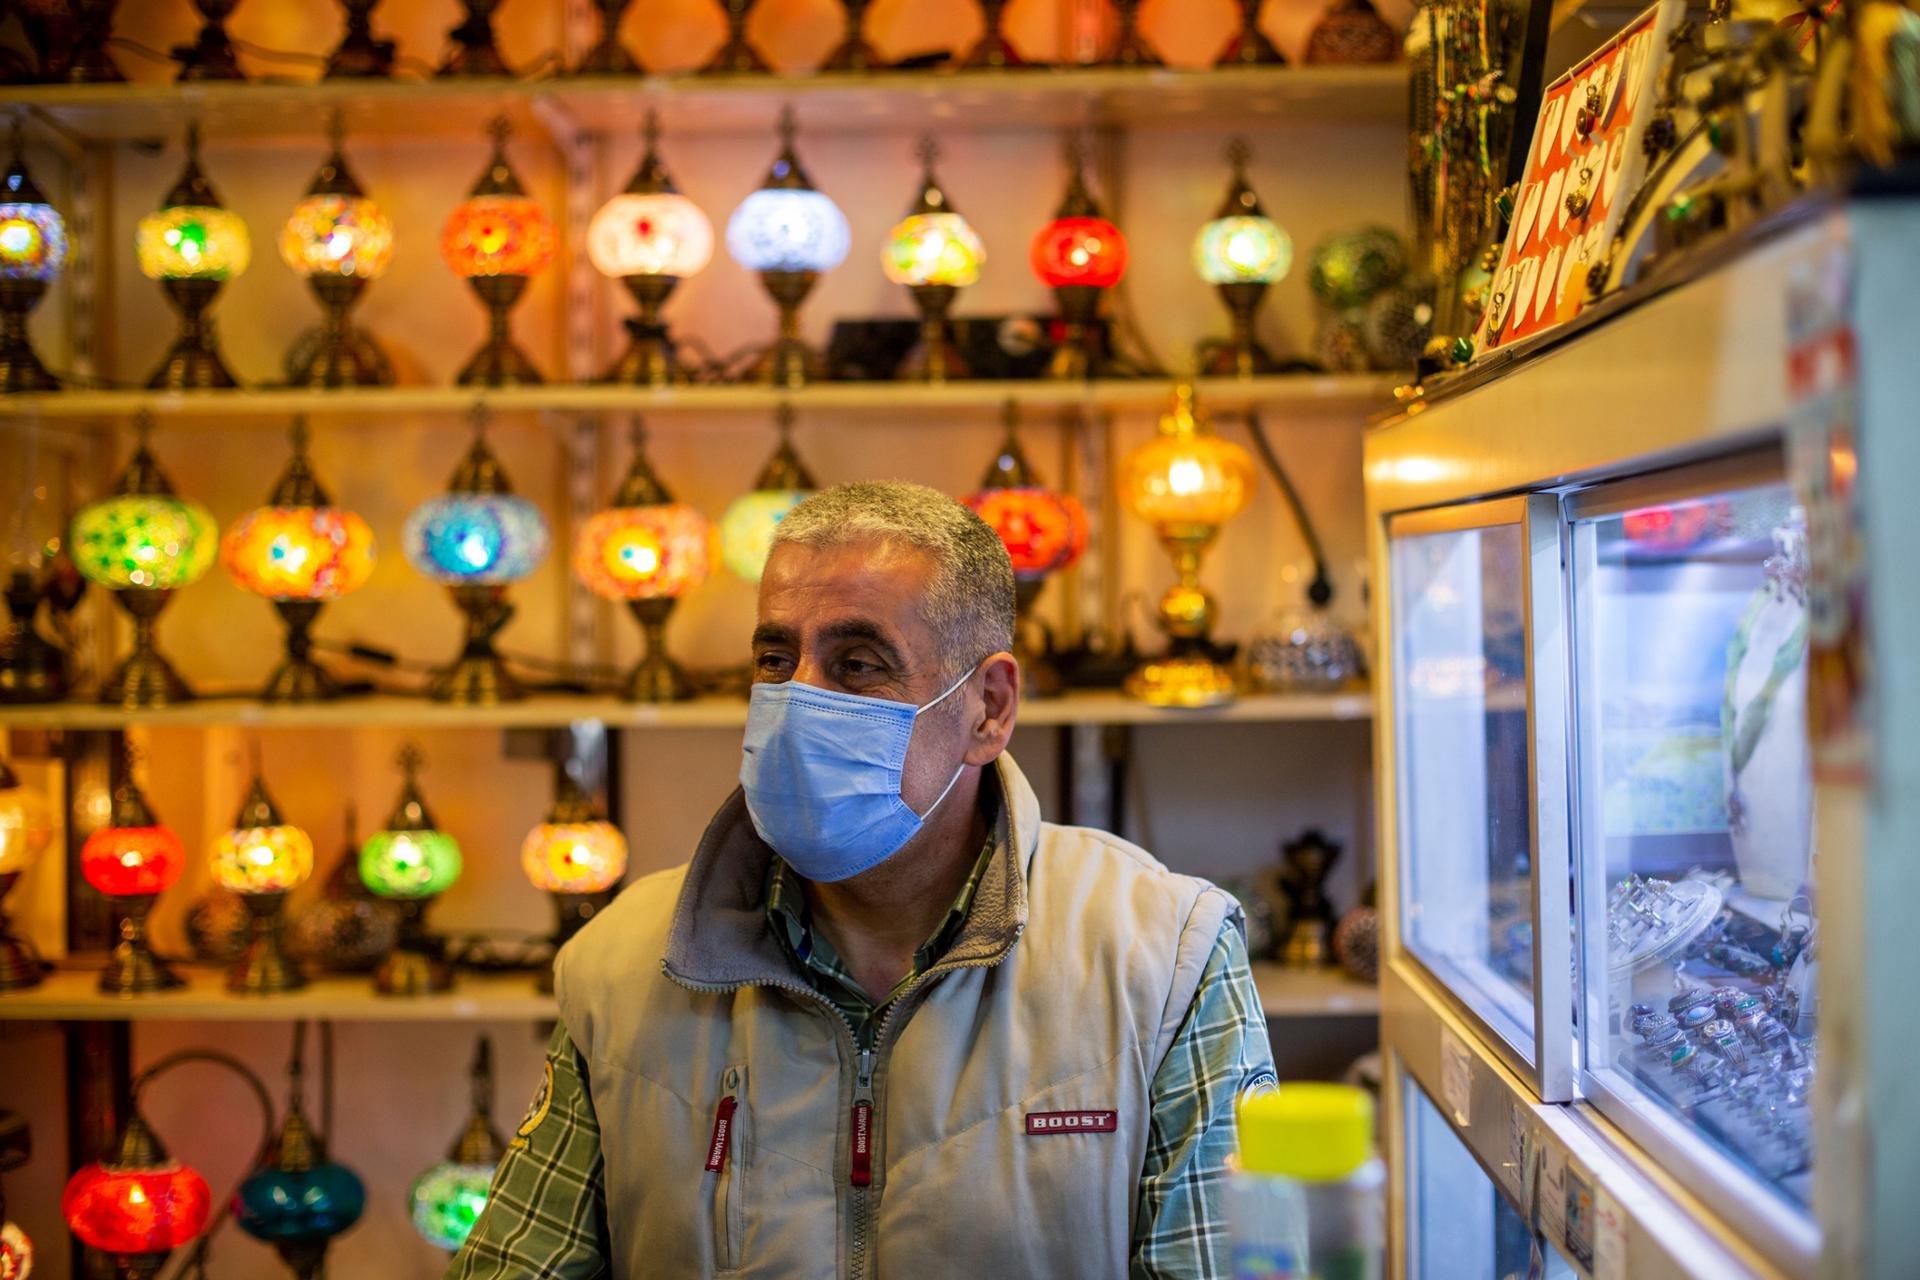 A man is shown with a face mask and standing in front of a wall of brightly colored lamps.